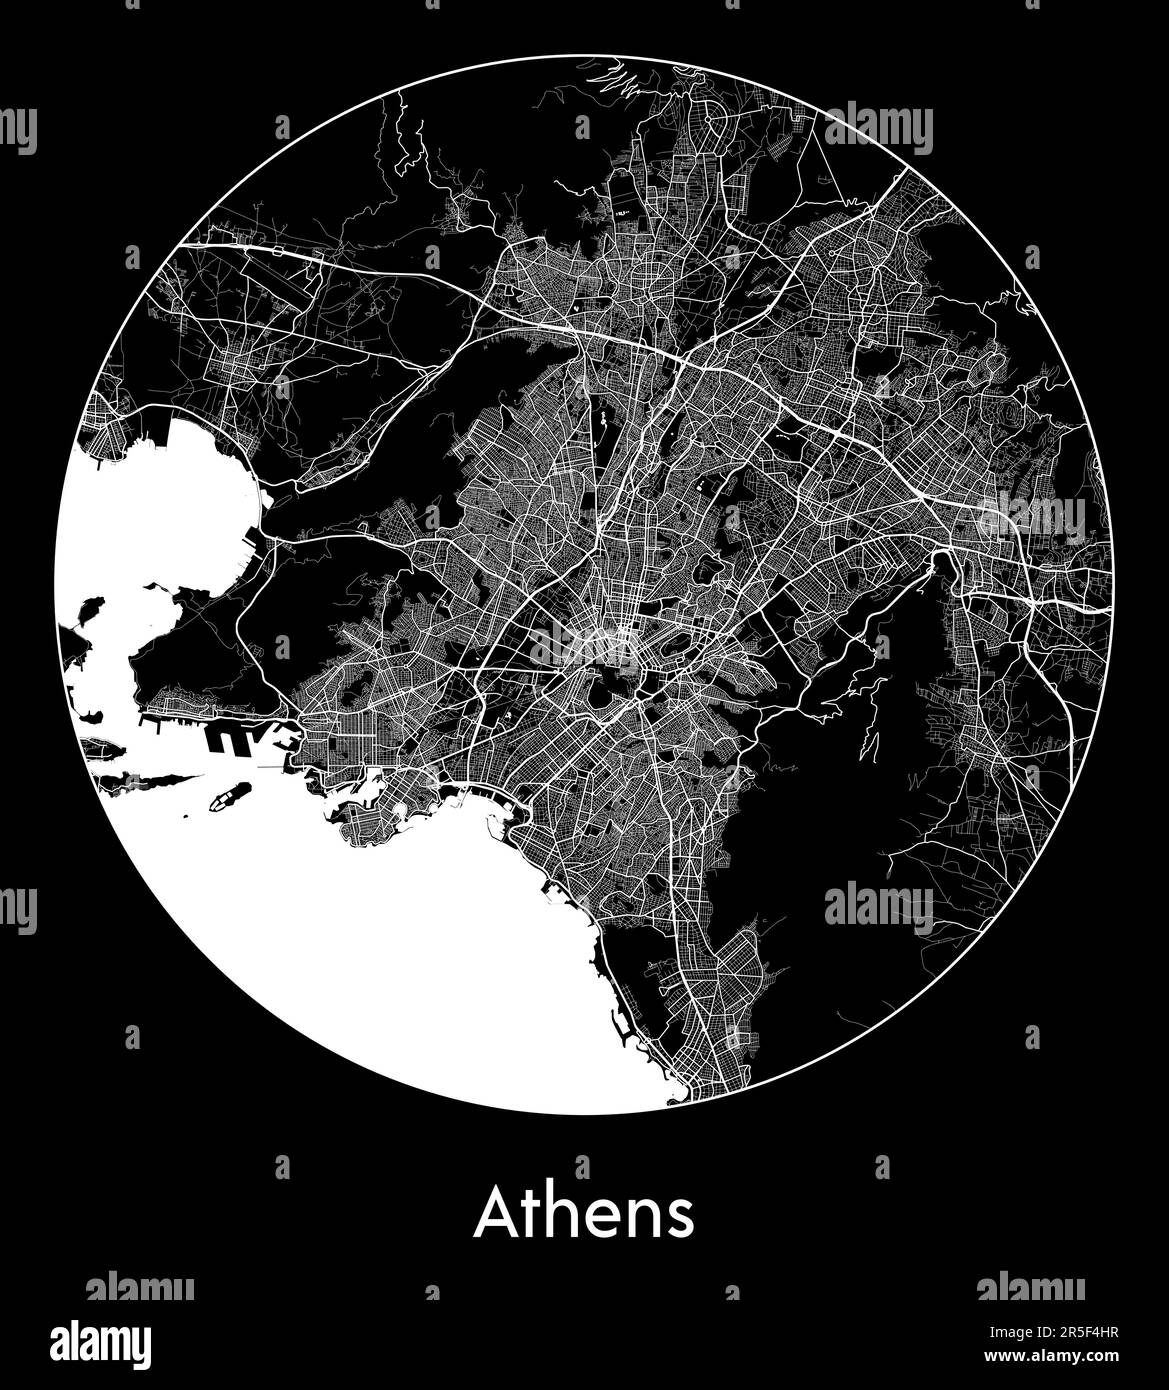 City Map Athens Greece Europe vector illustration Stock Vector